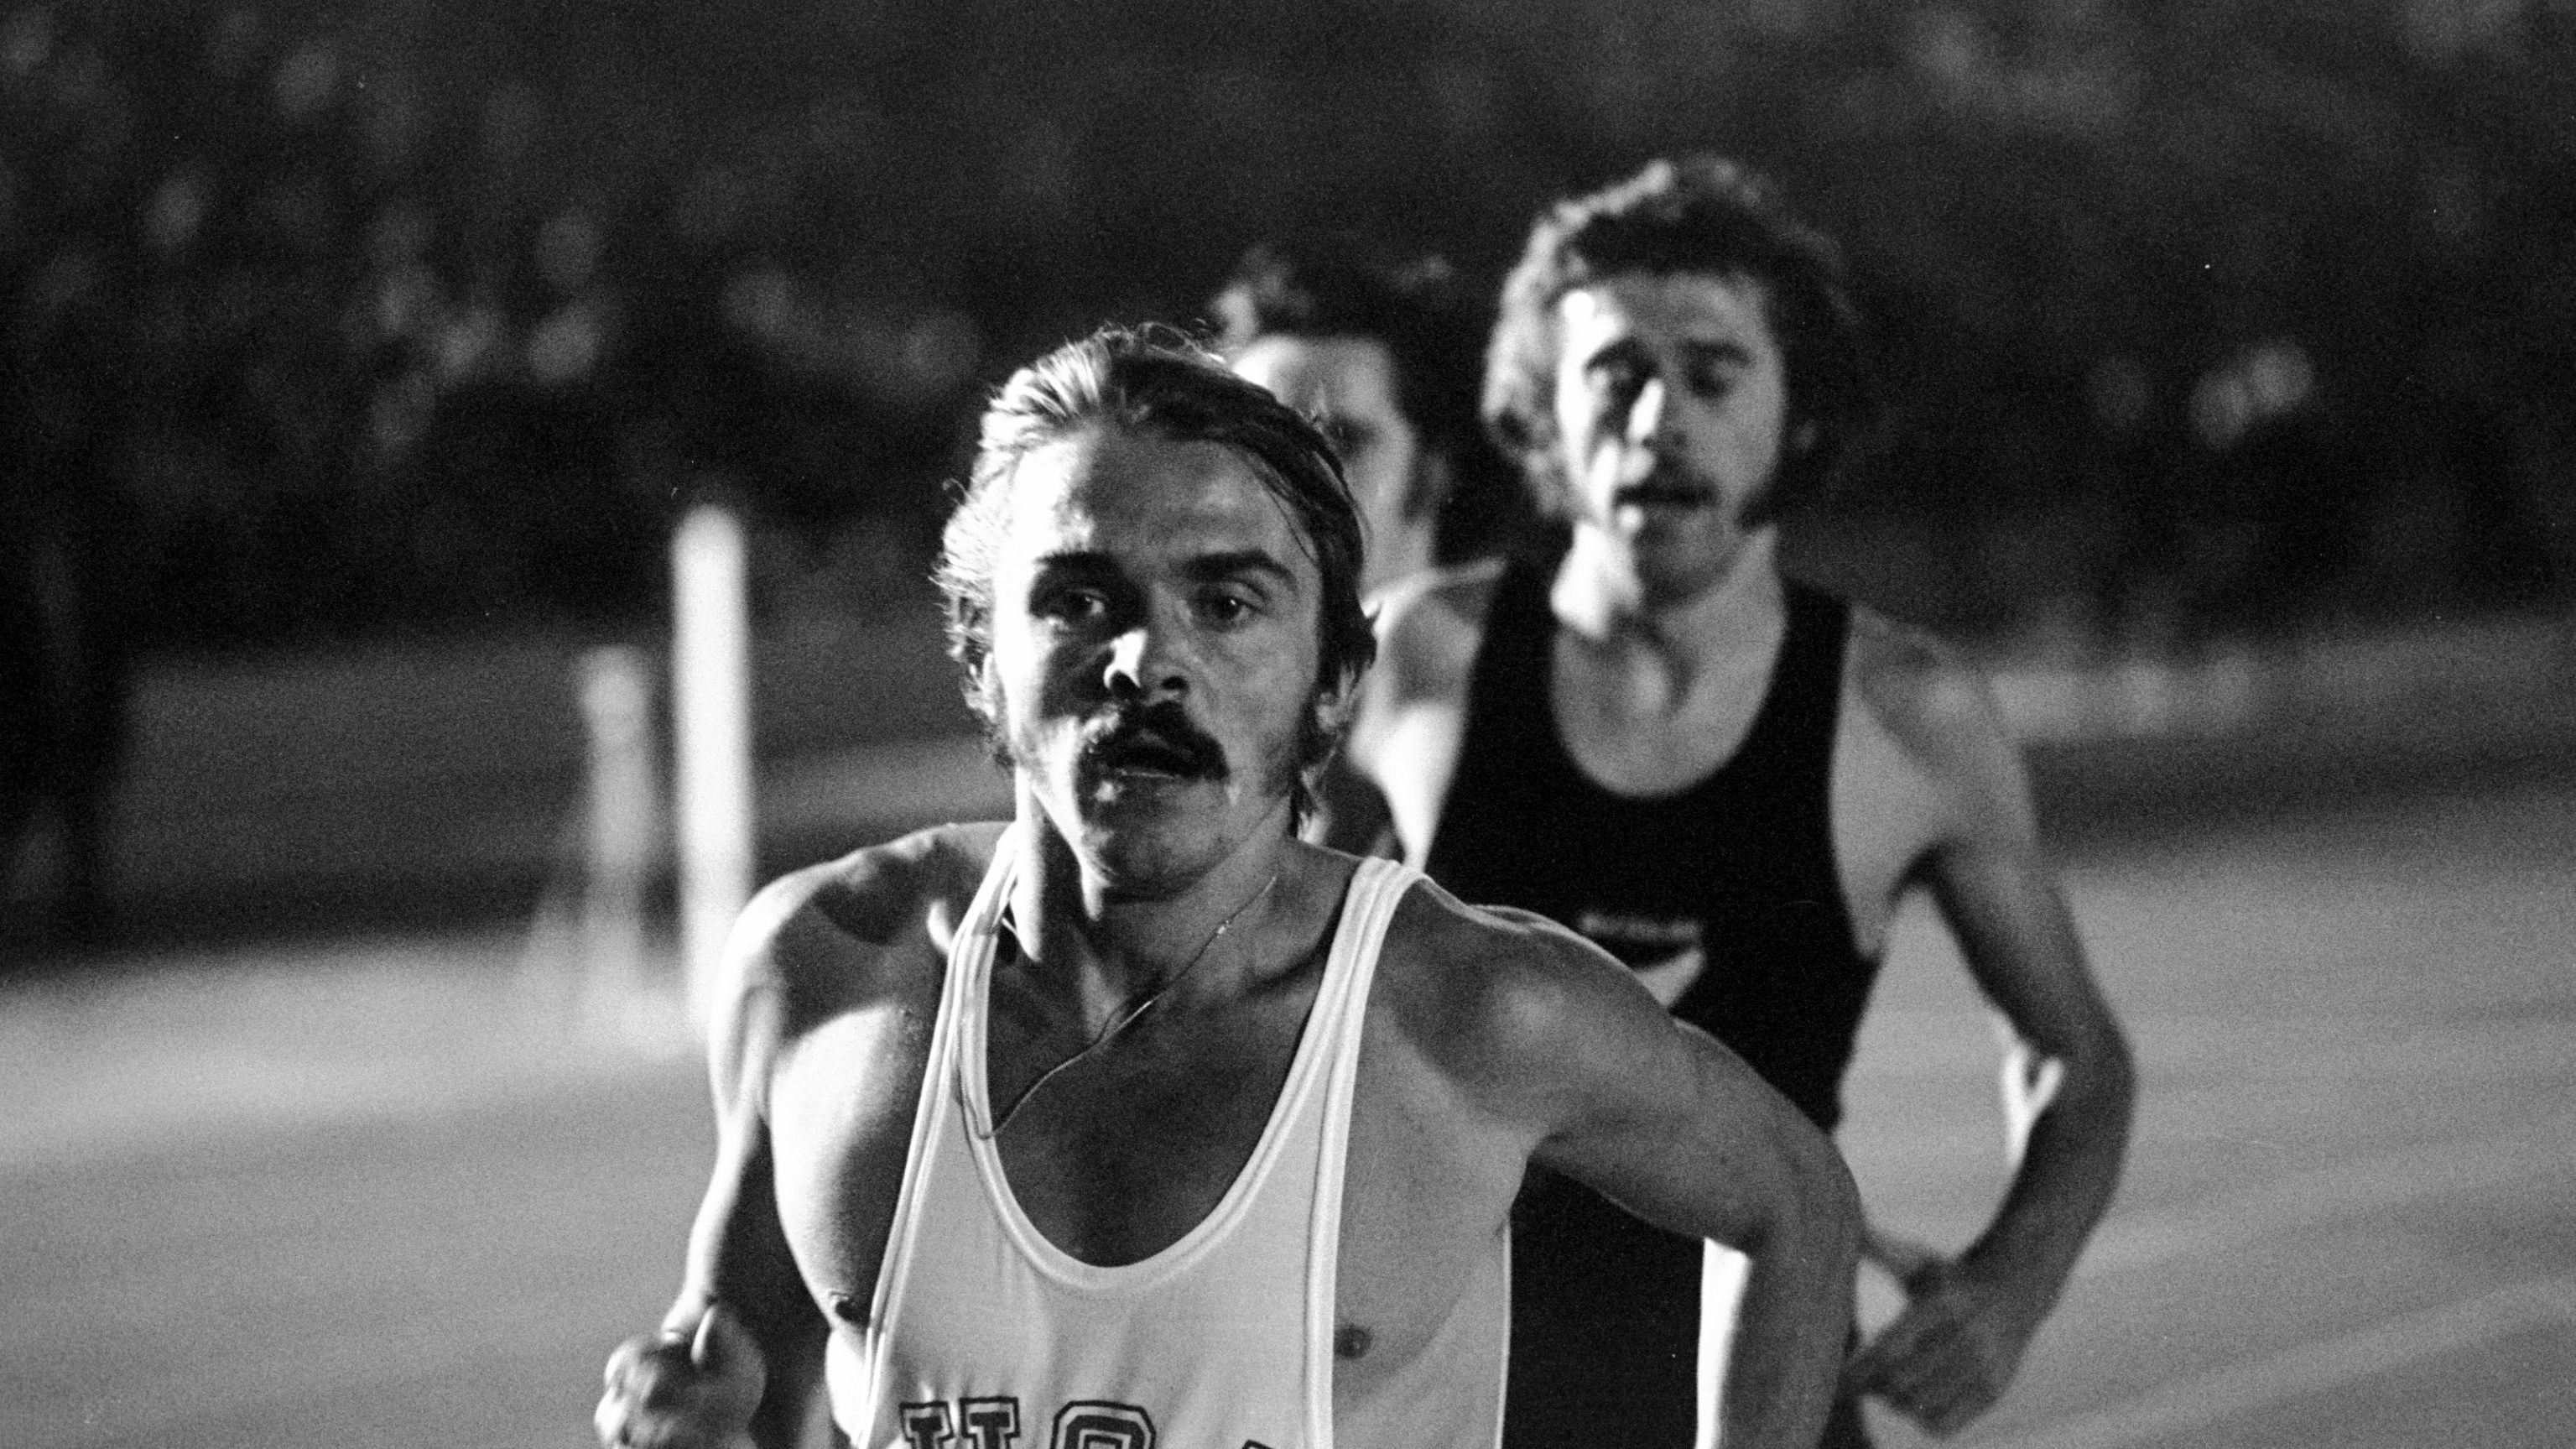 Steve Prefontaine set the 5,000 meter record at the U.S. Olympic trials in 1972, a record that stood for 40 years.